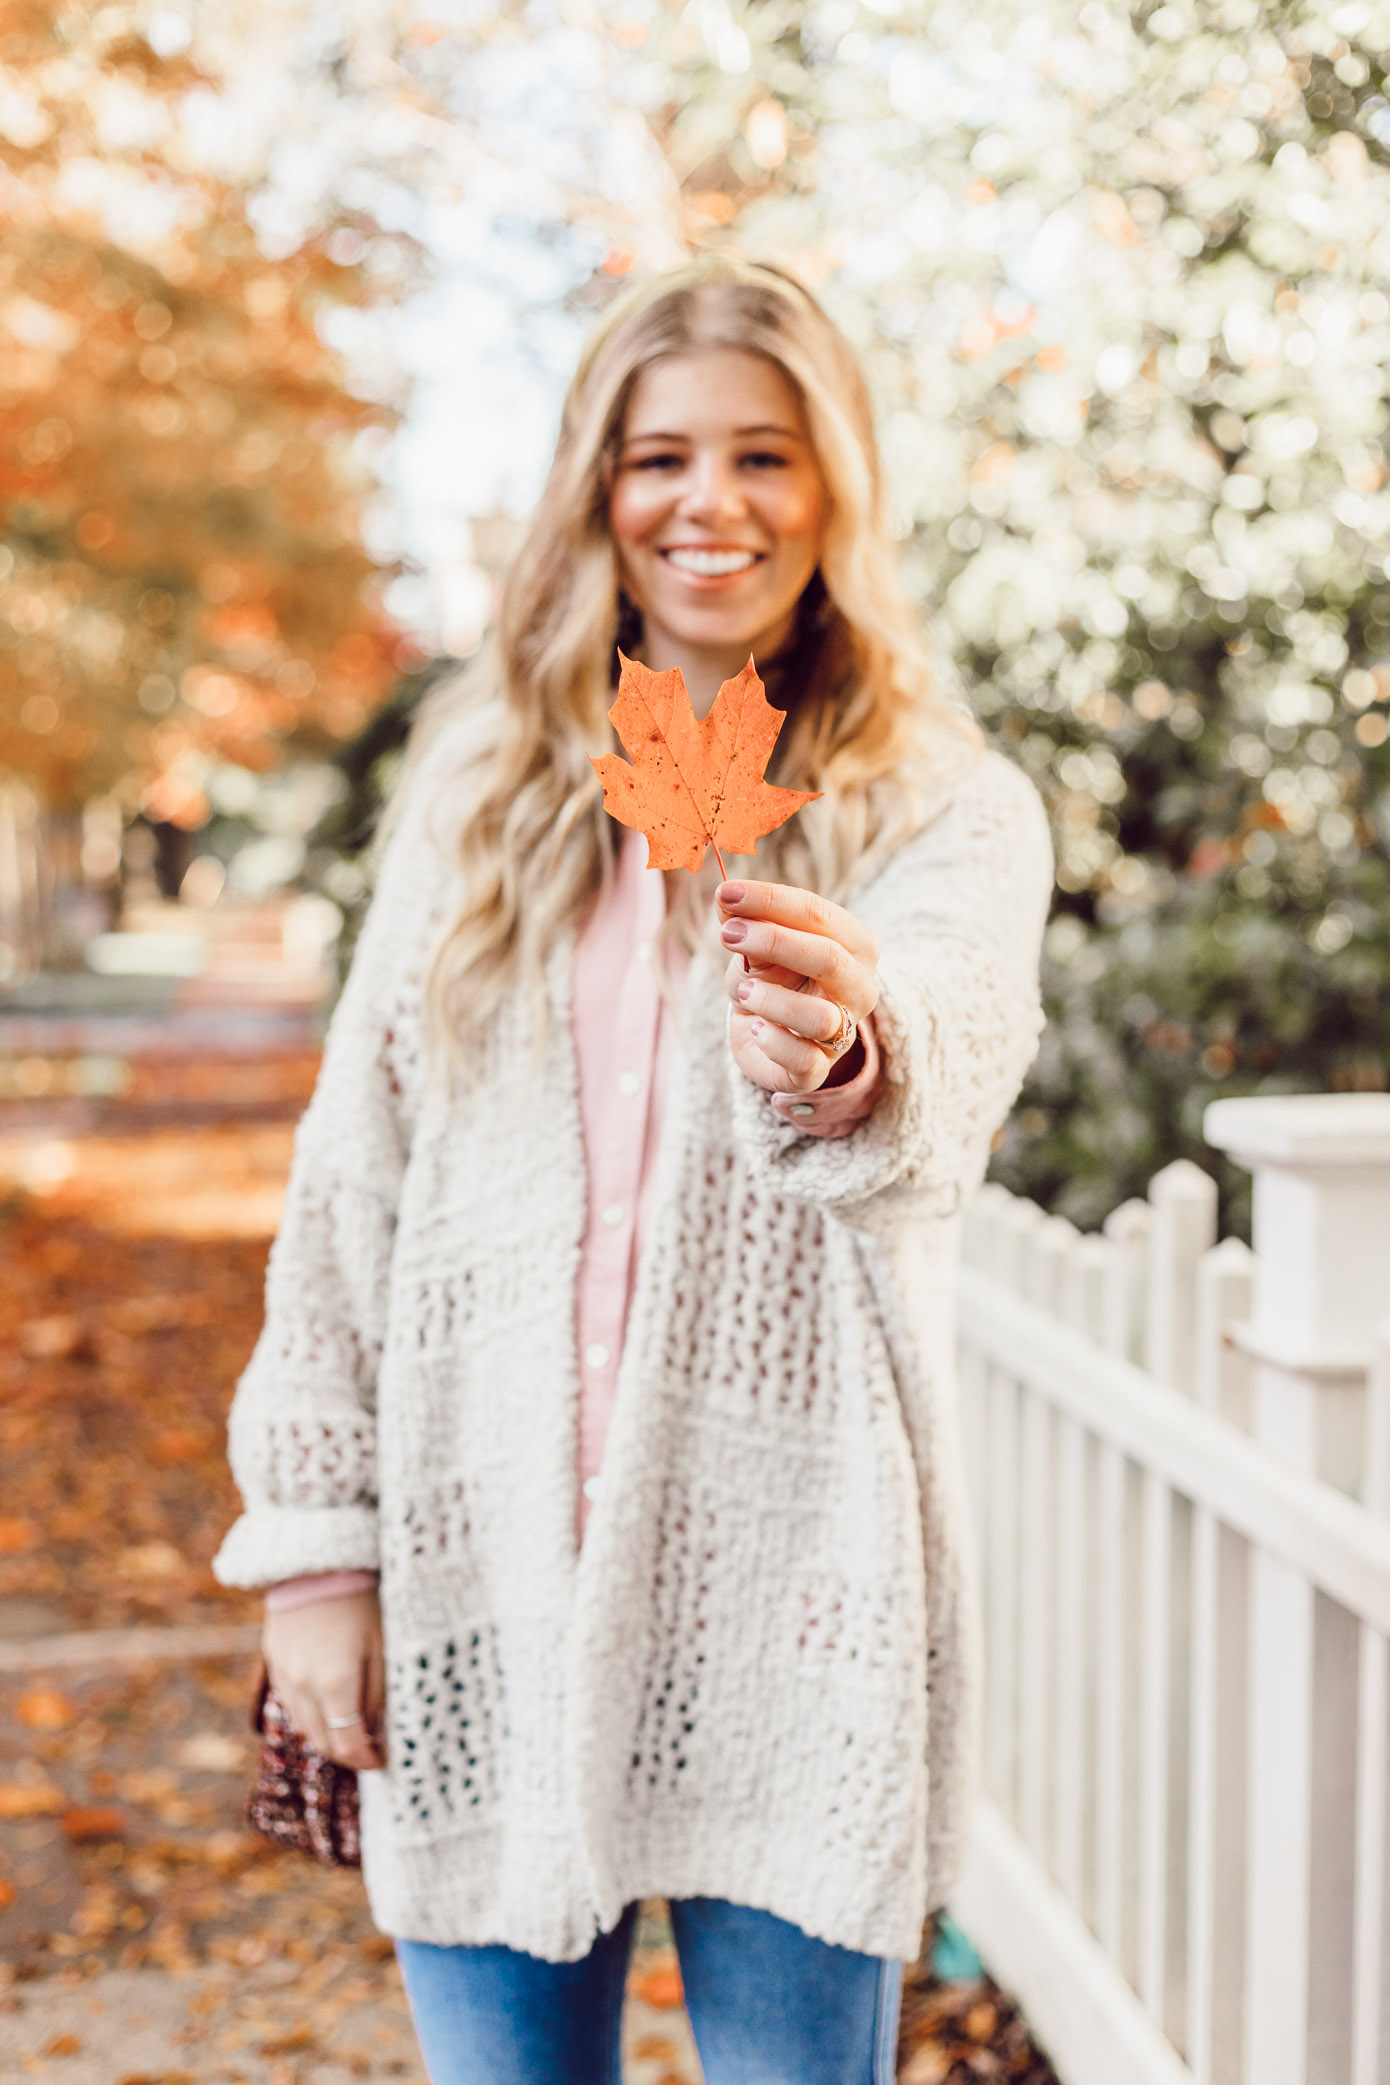 No Fail Thanksgiving Outfit, Casual Fall Outfit | Free People Saturday Morning Cardigan featured on Louella Reese Blog